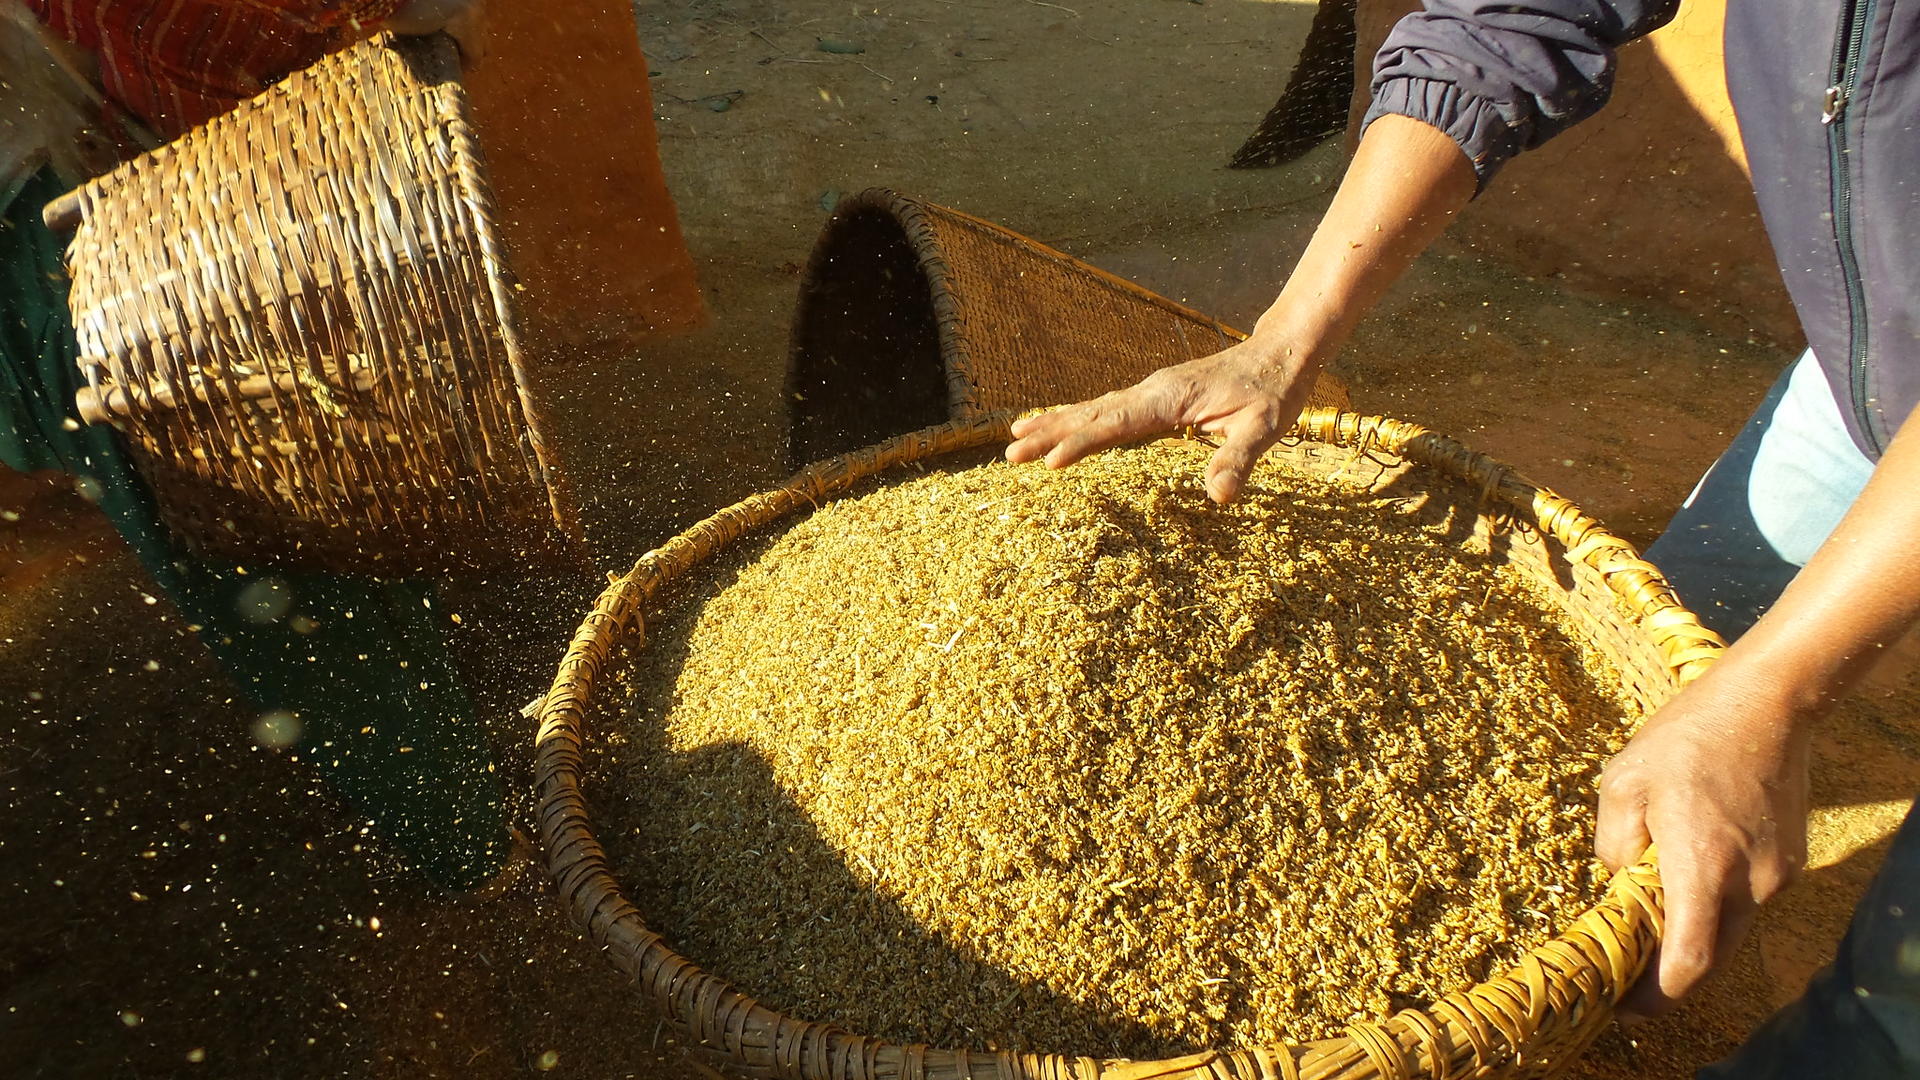 Many traditional nutrient-rich grains, such as fonio or finger millet (pictured), have been marginalized by modern diets. Photo: Alliance of Bioversity and CIAT/G.Meldrum